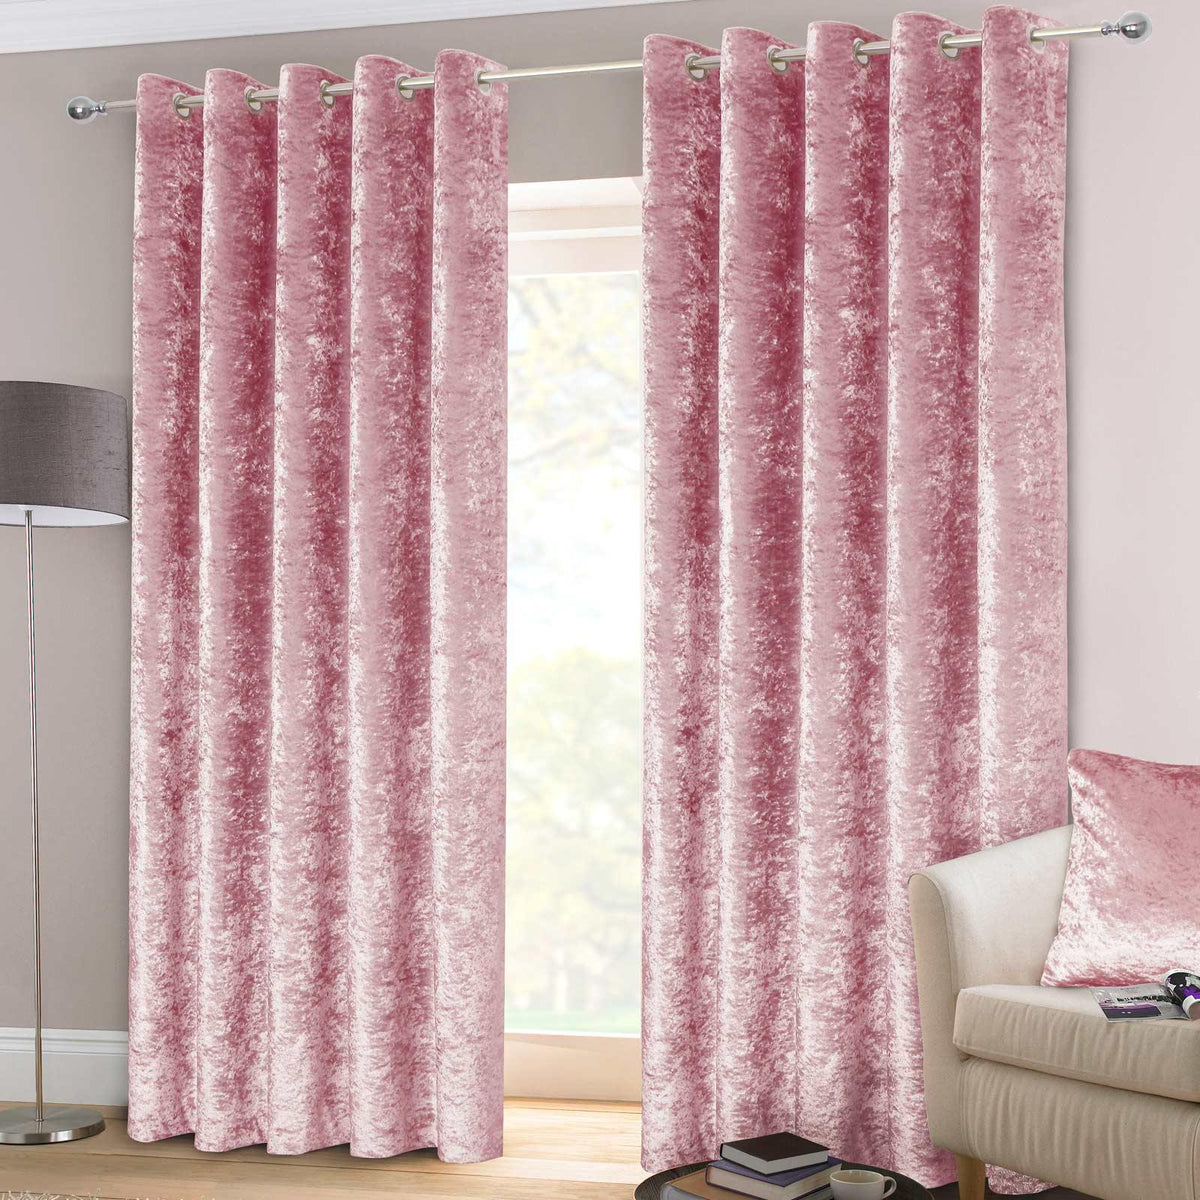 Crushed Velvet Lined Eyelet Curtains Blush Pink – Ideal Textiles